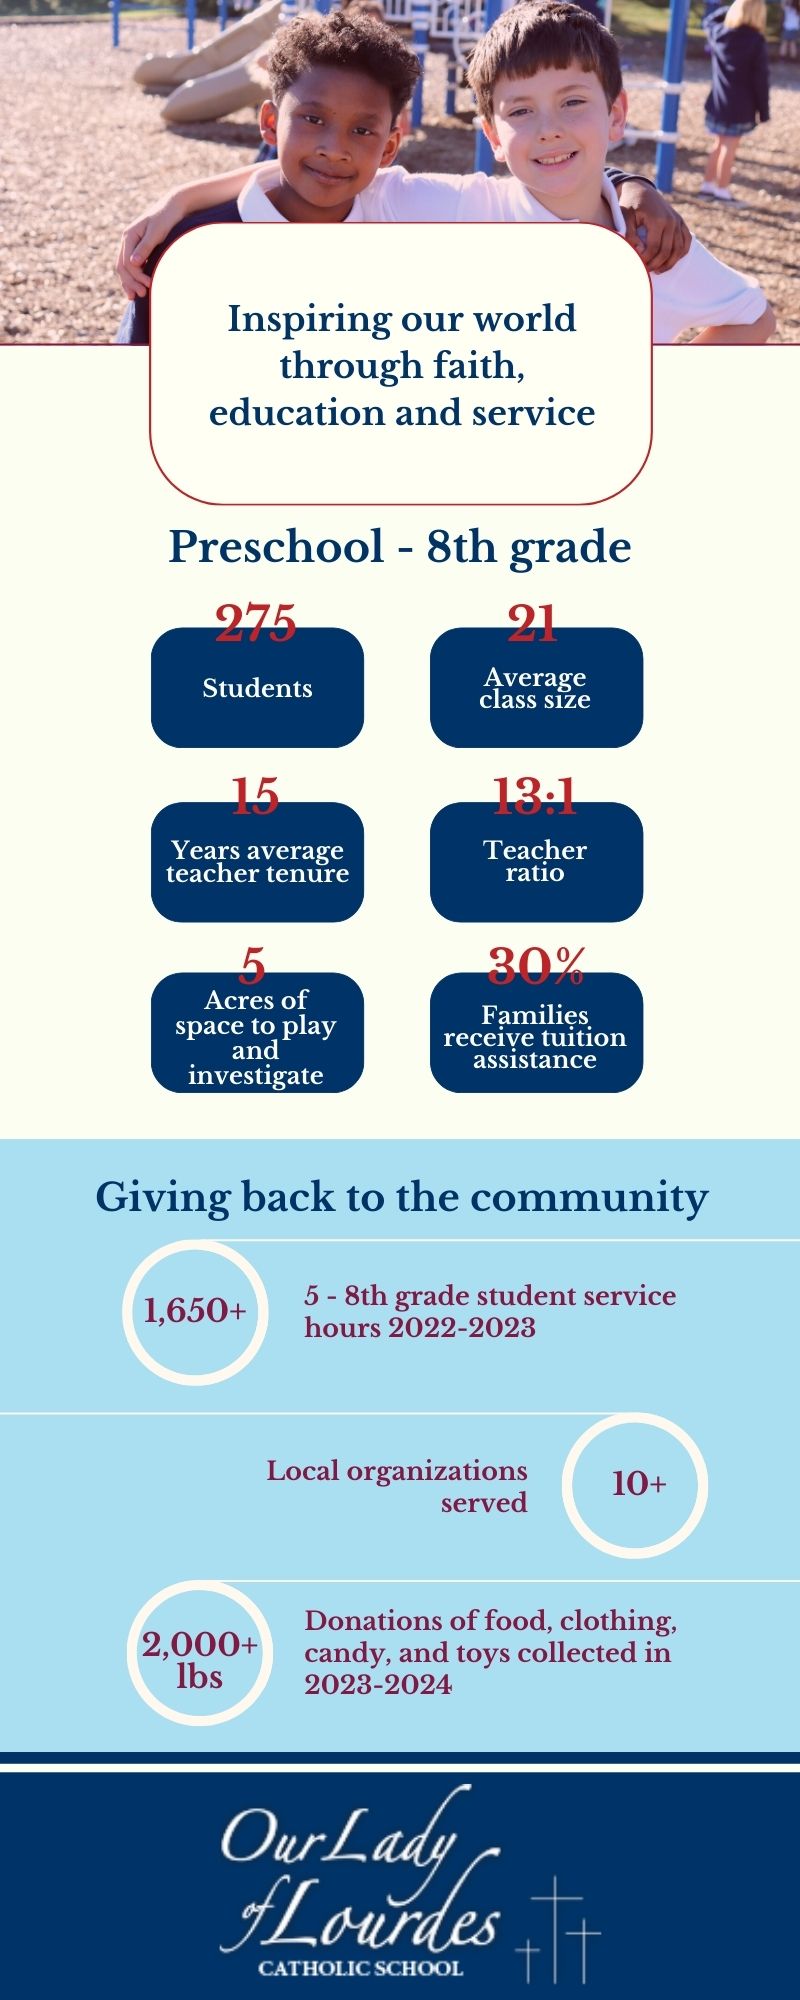 Our Lady of Lourdes Catholic School 2023-2024 infographic